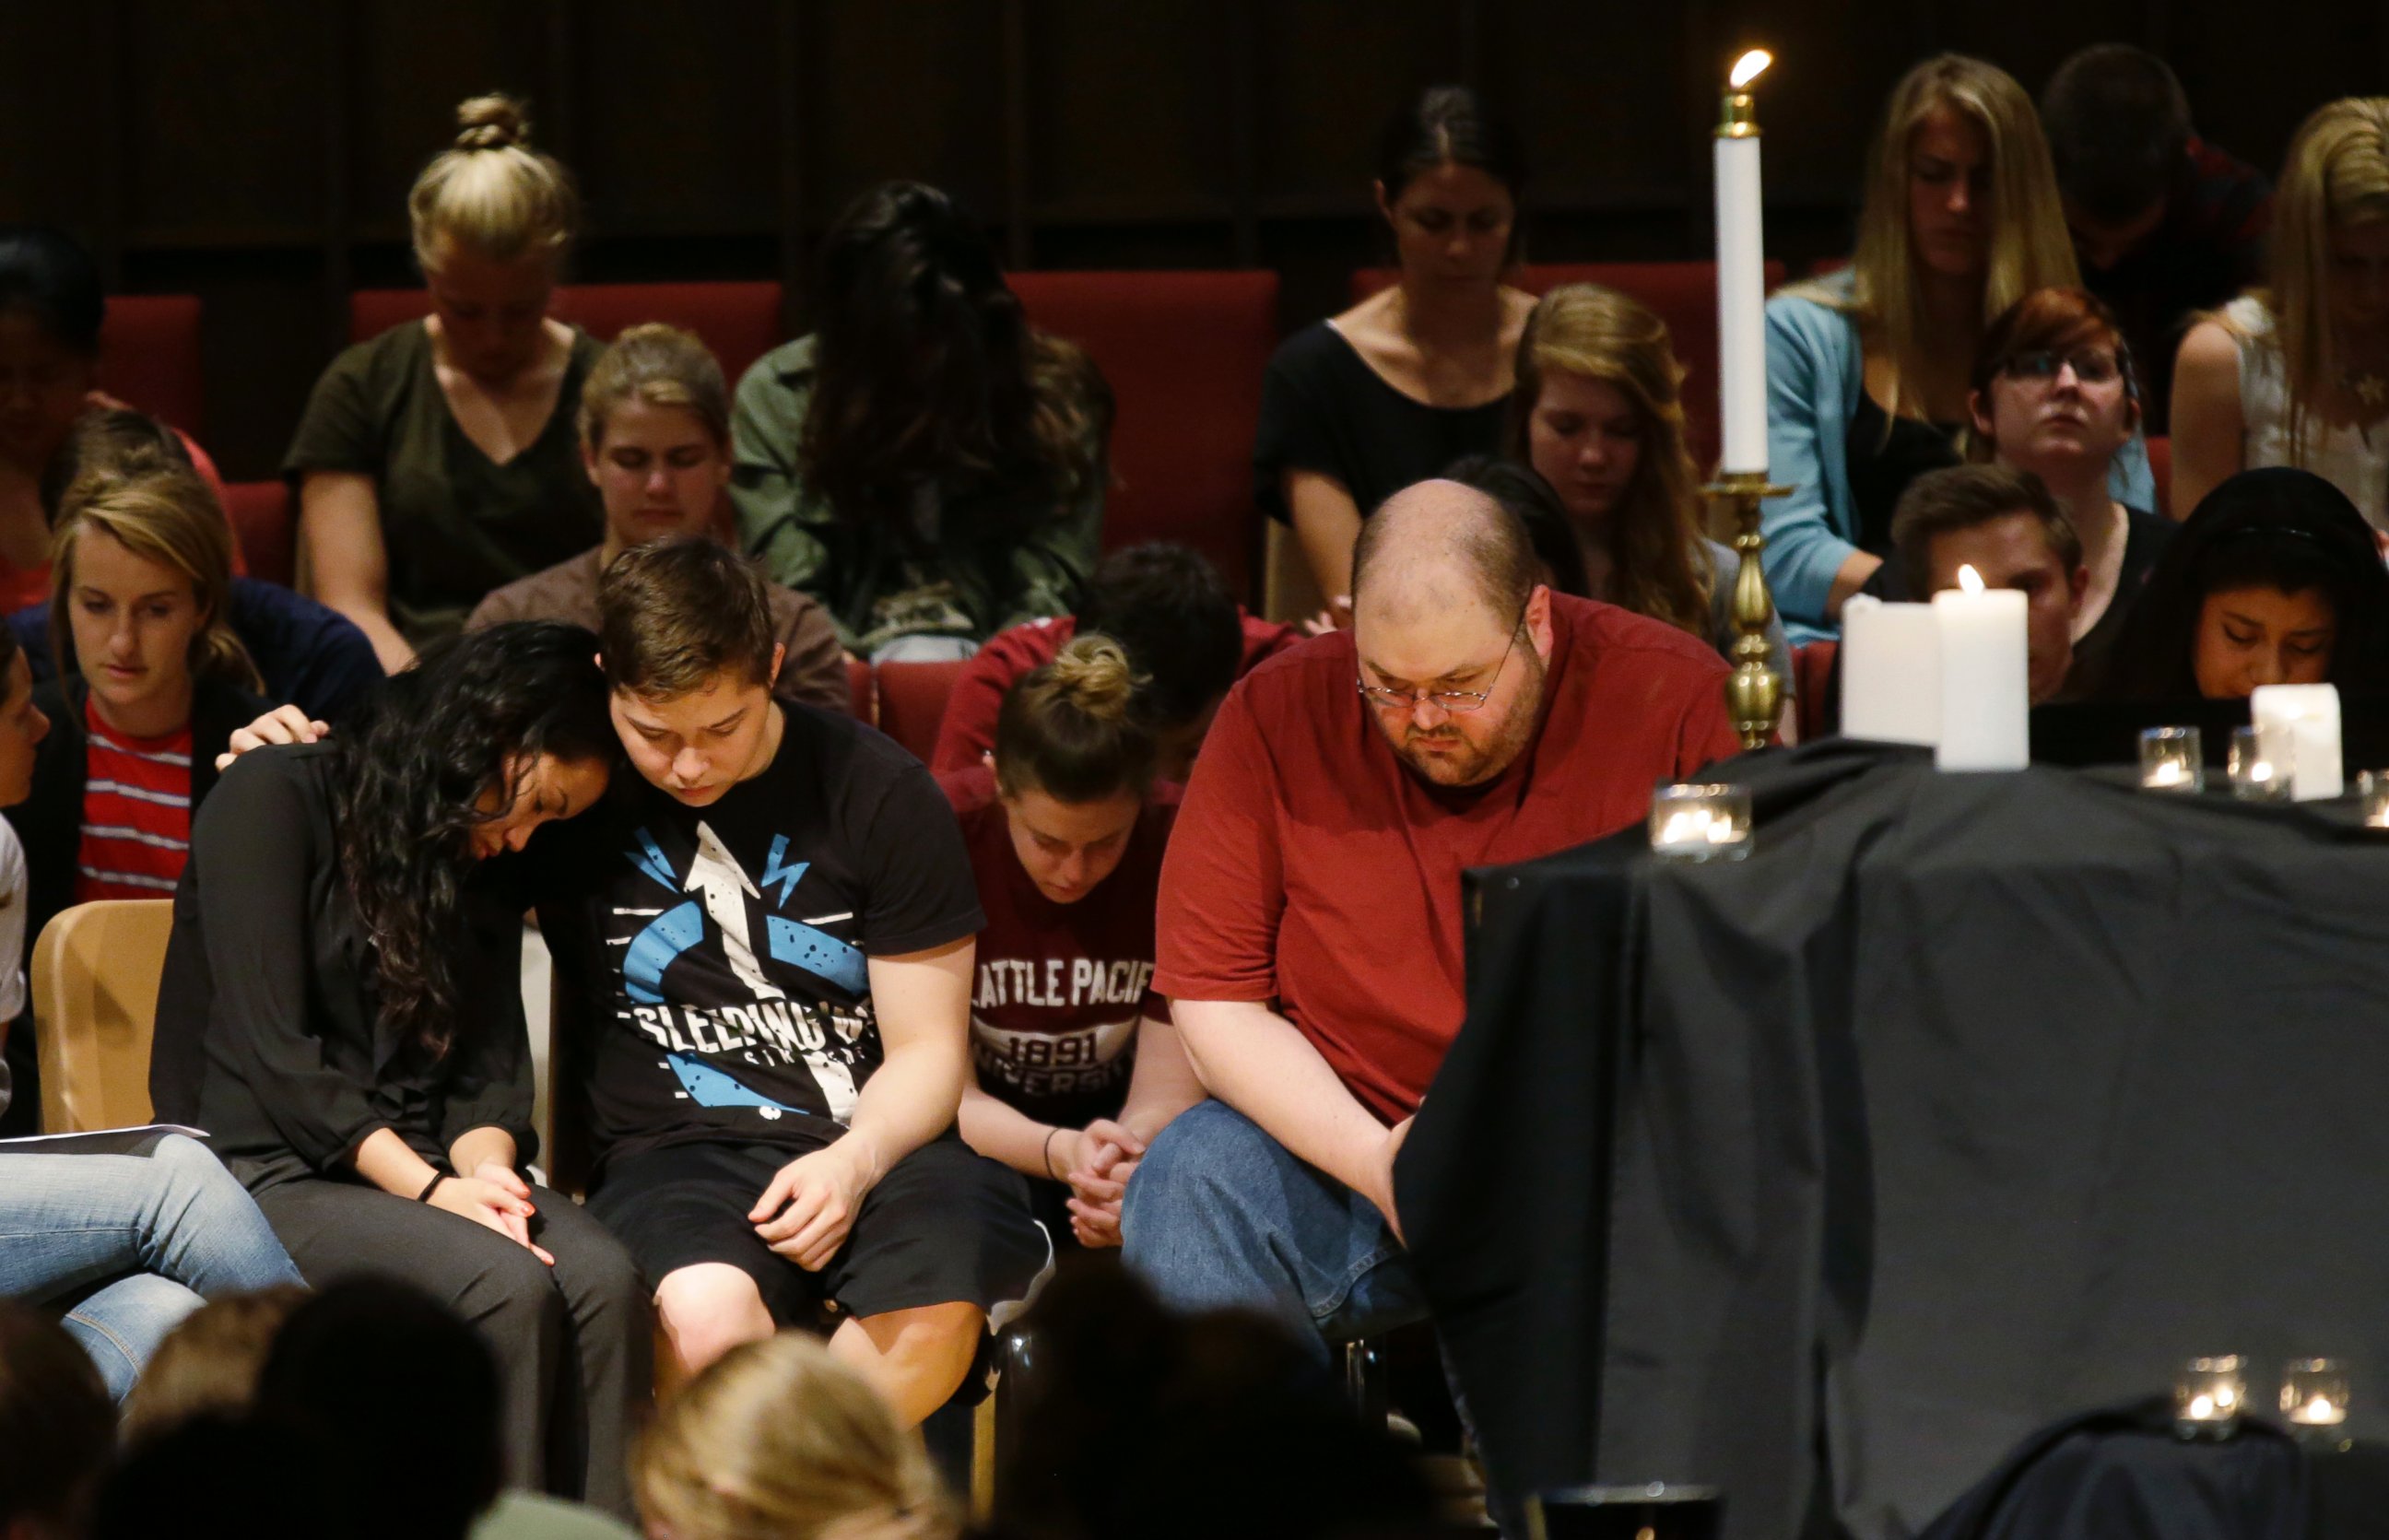 PHOTO: People bow their heads near a display of candles at a prayer service at First Free Methodist Church, June 5, 2014, on the campus of Seattle Pacific University in Seattle.